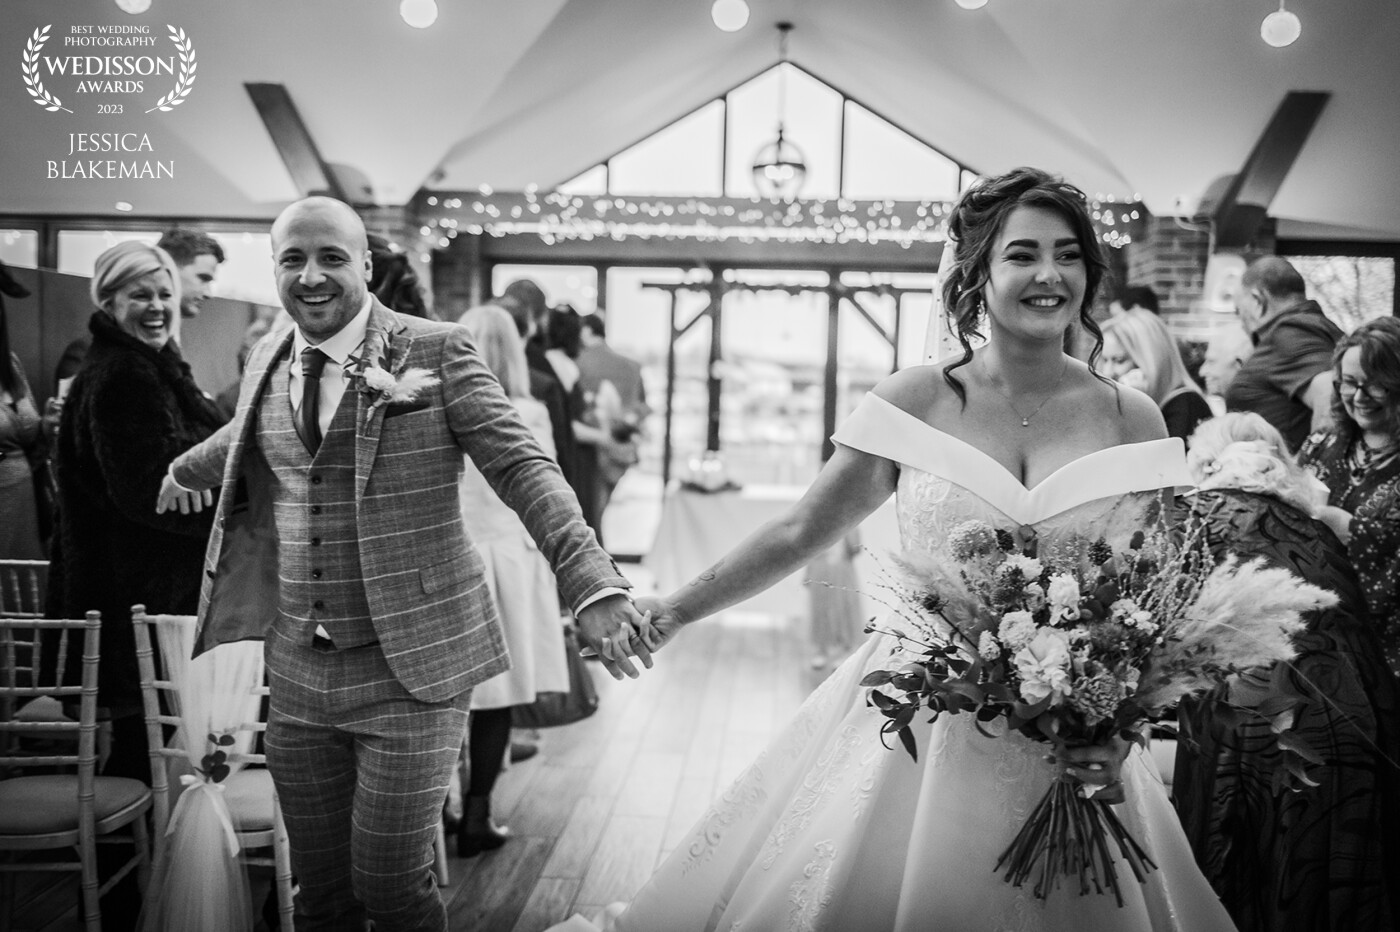 Is there anything better than that just married feeling? Erin and Lee were certainly full of smiles on their way down the aisle after saying "I do"